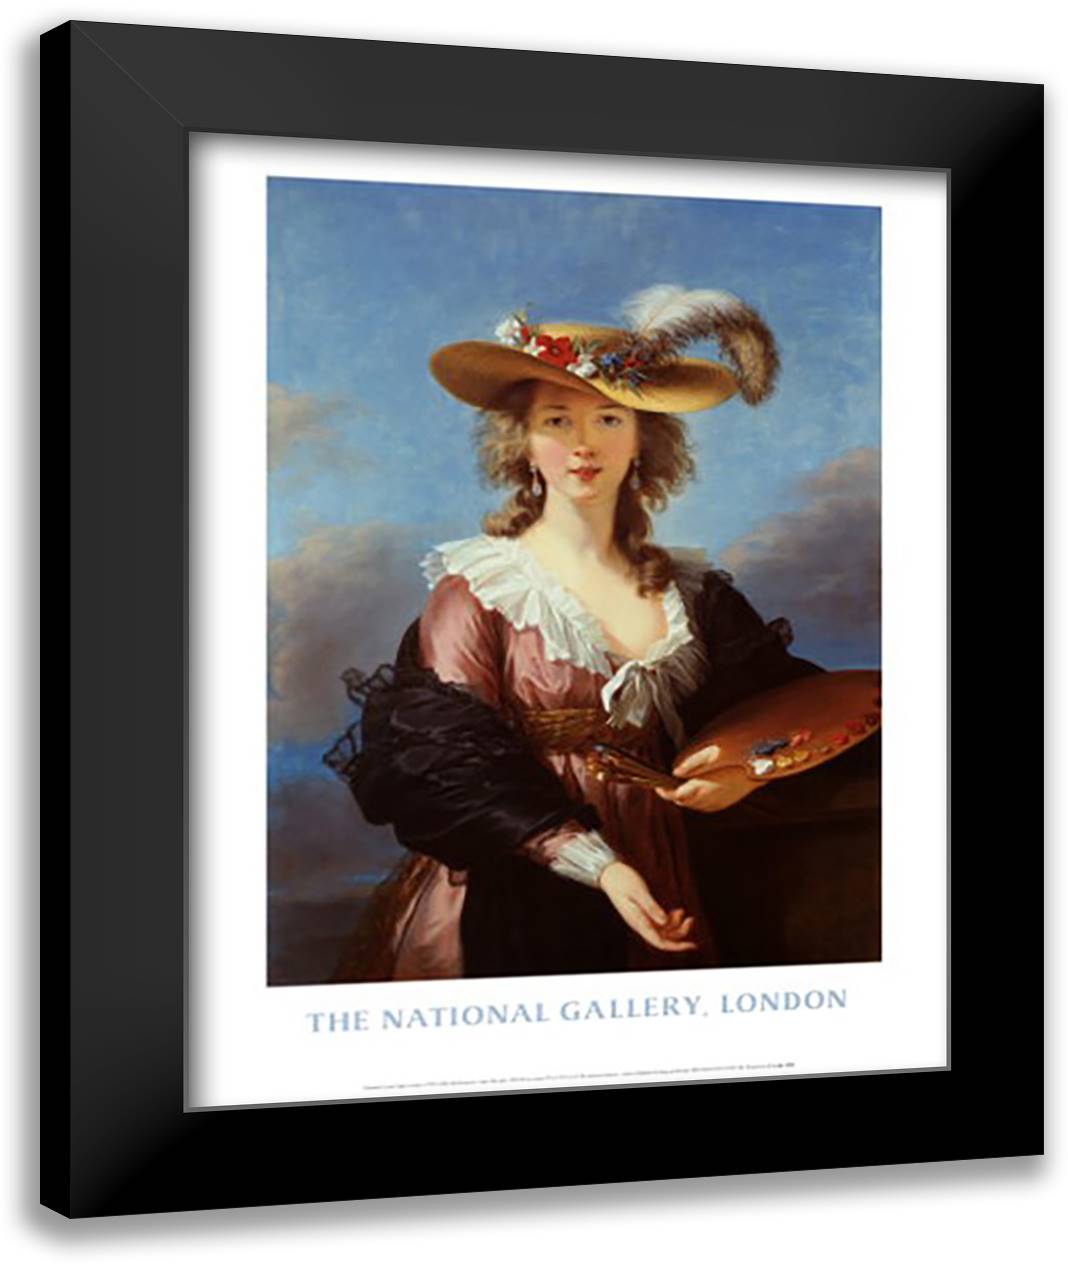 Self Portrait in a Straw Hat 28x36 Black Modern Wood Framed Art Print Poster by Brun, Marie Vigee-Le